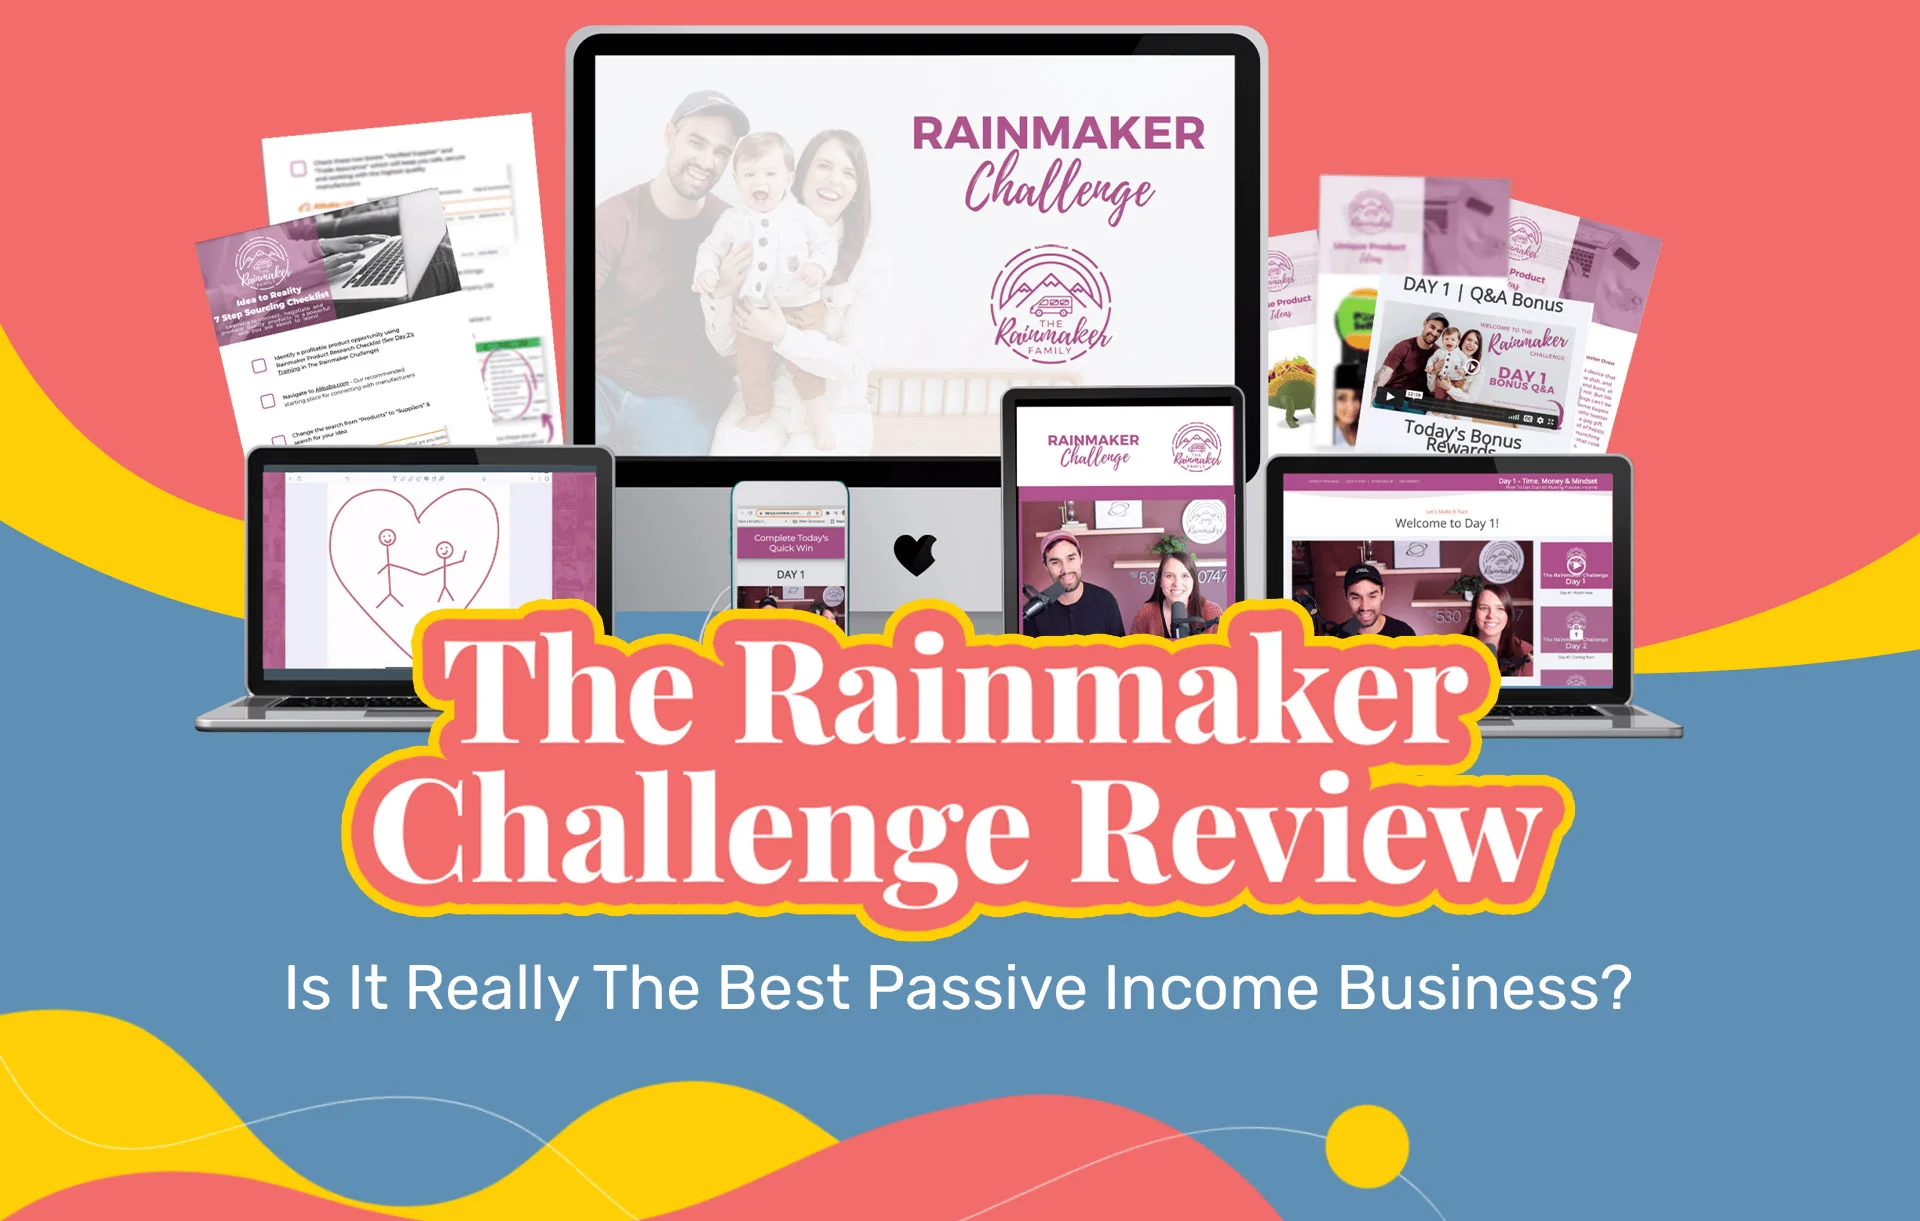 Rainmaker Challenger Reviews: Is It Worth It?